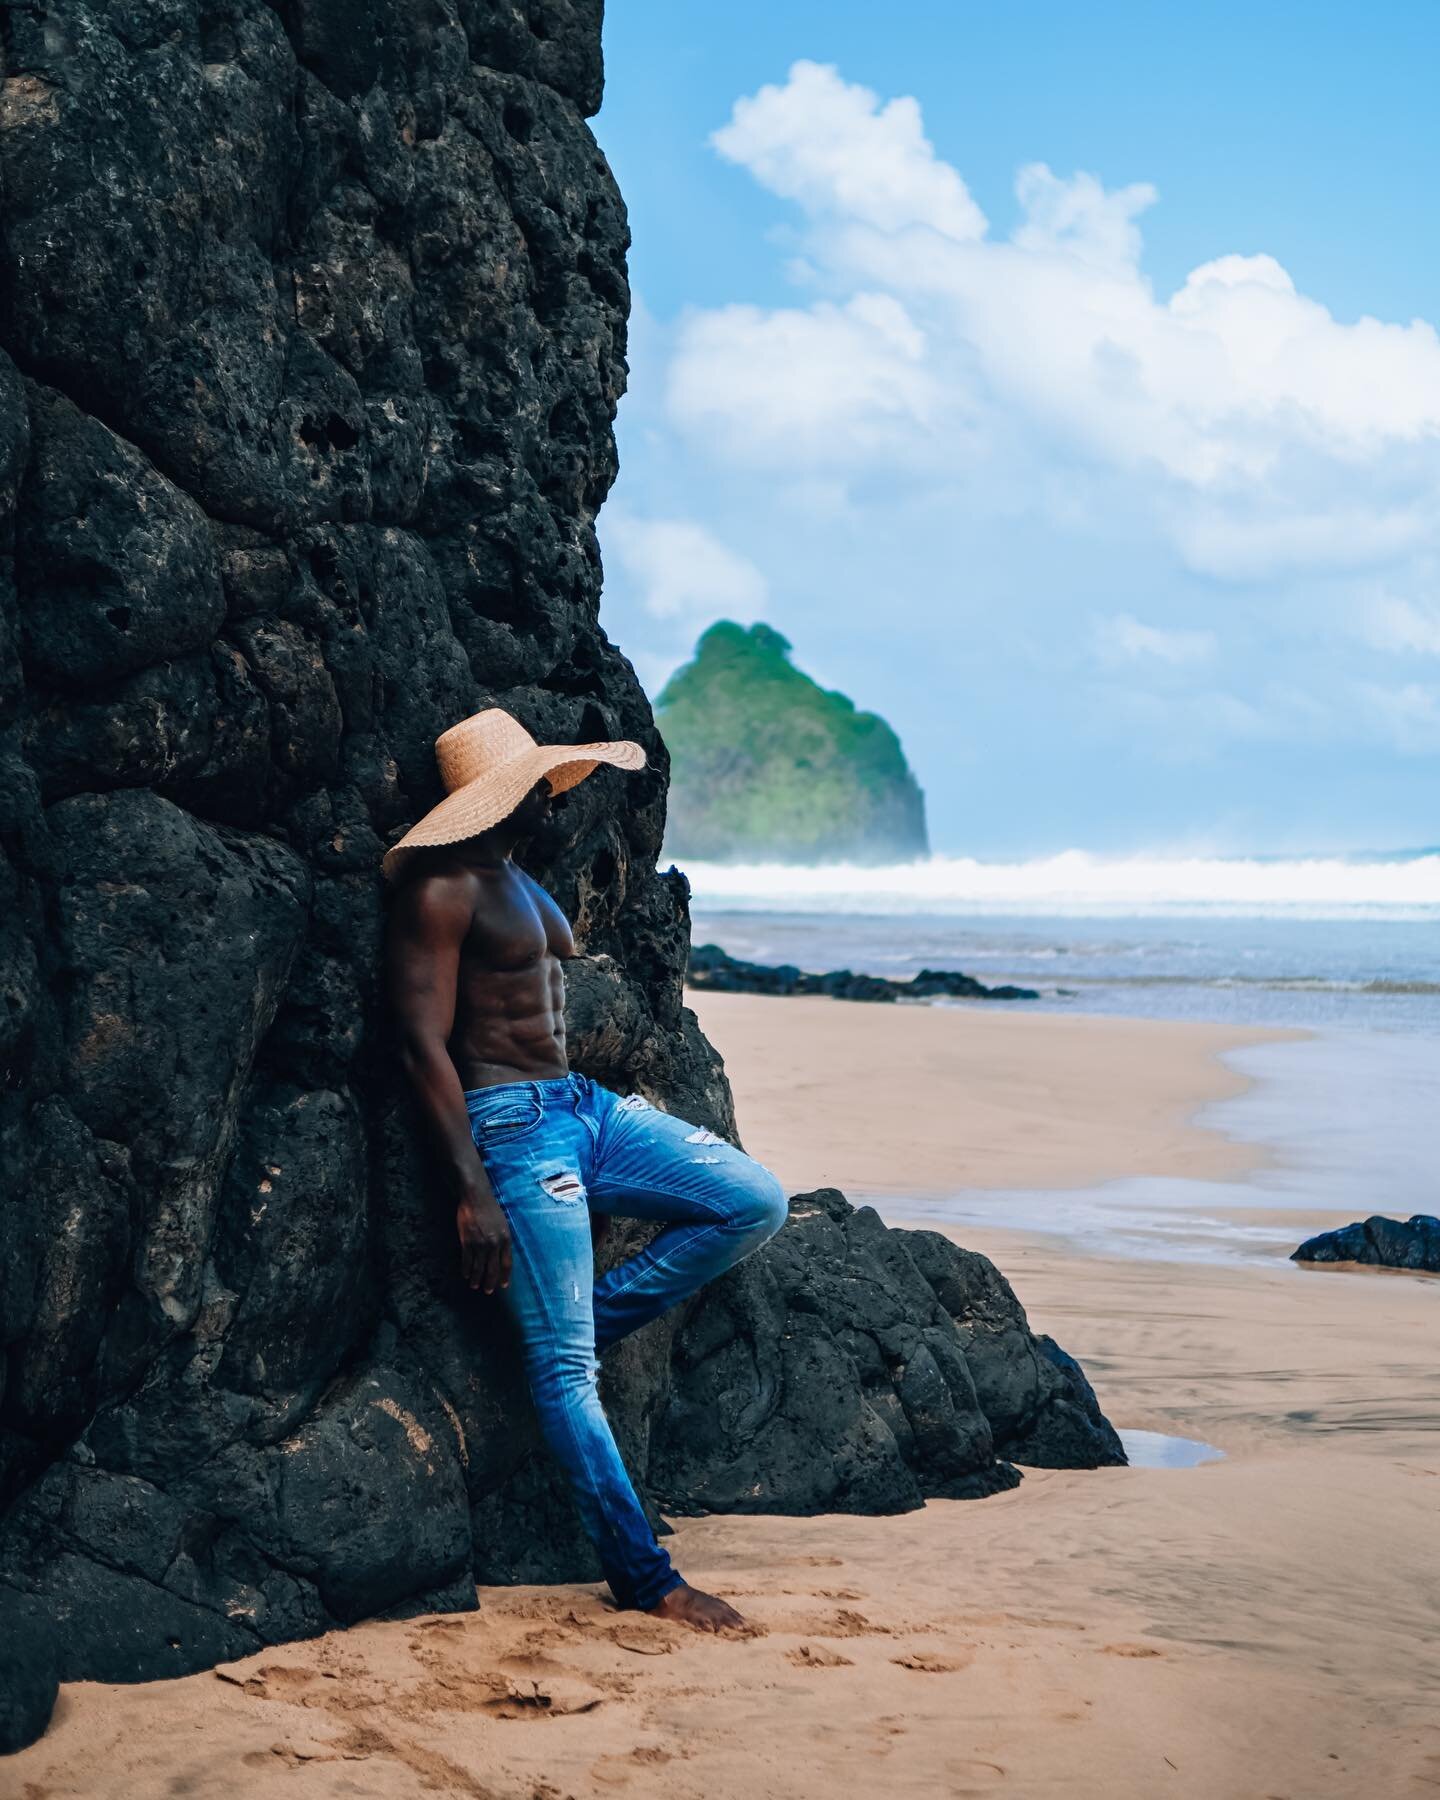 Getting creative in Fernando de Noronha 📸🏝️ Which photo is your favorite? 

-&gt; Swipe for a peek behind the scenes 
And save this post so you don&rsquo;t forget to visit this amazing island in Brazil!

Featuring @cfofana 

- - - 

Qual &eacute; a